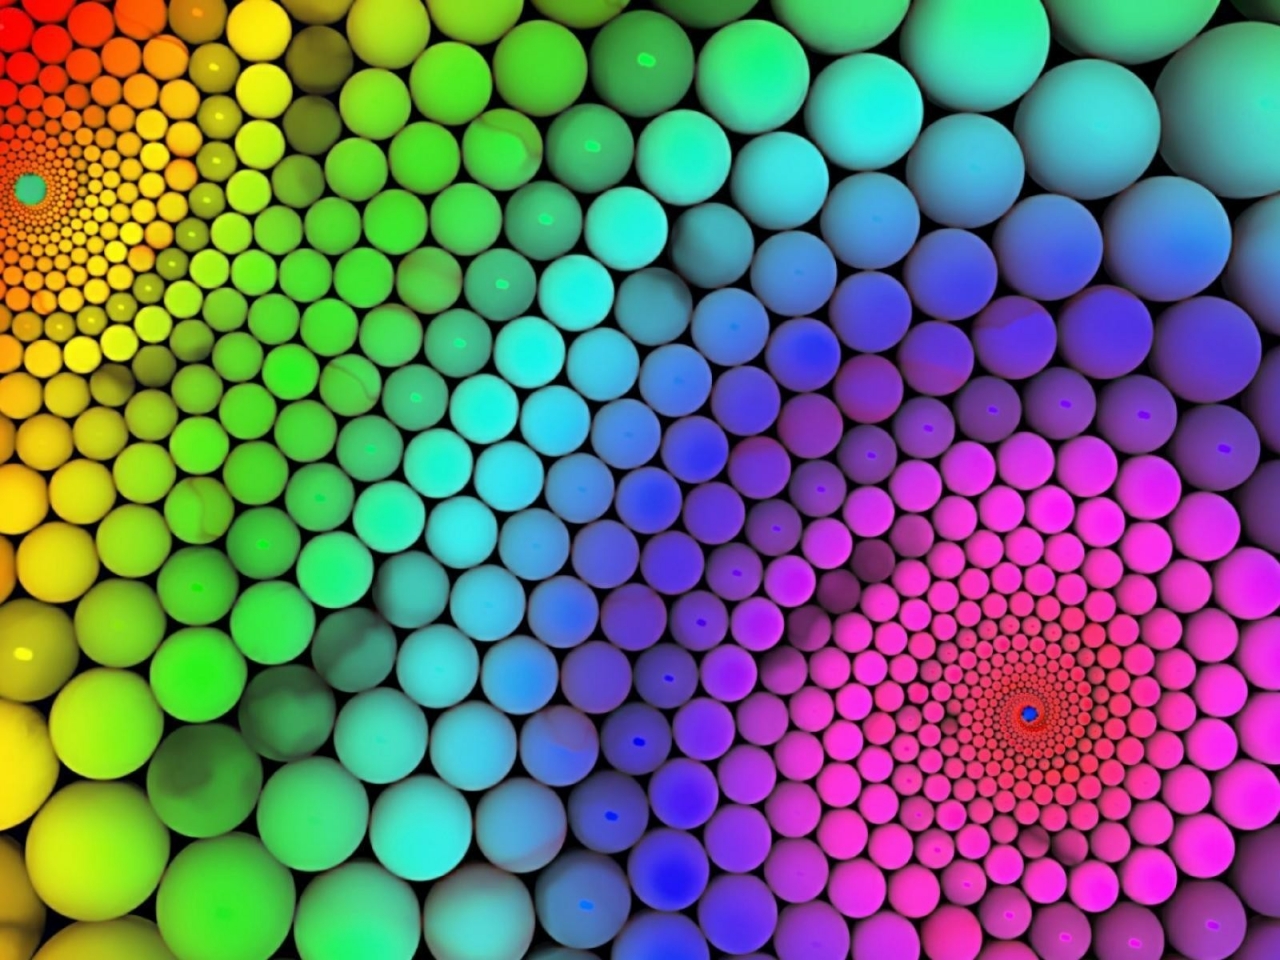 Colourful Balls for 1280 x 960 resolution